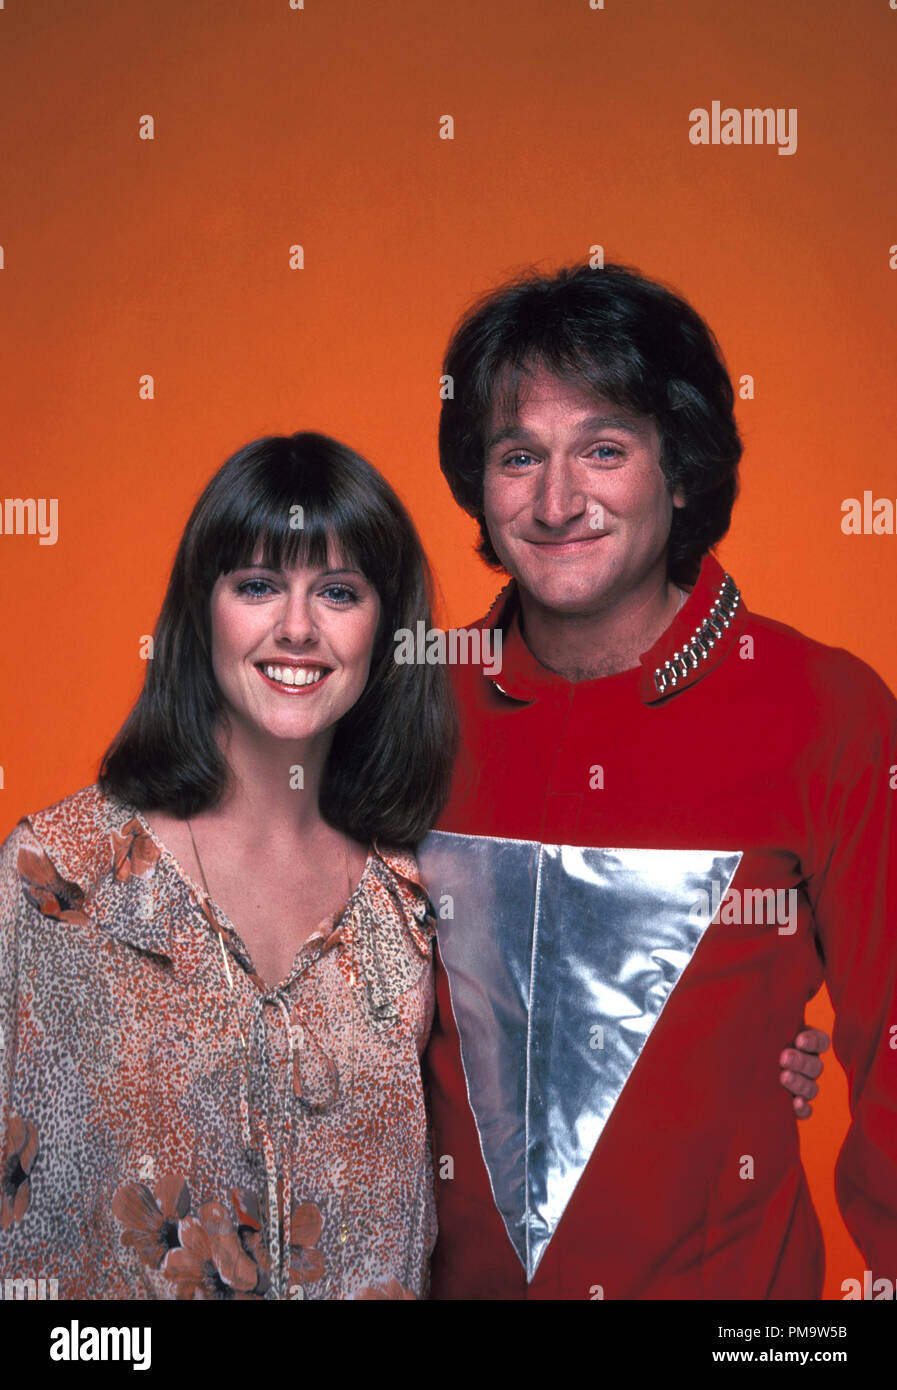 Studio Publicity Still from 'Mork & Mindy' Pam Dawber, Robin Williams 1978  All Rights Reserved   File Reference # 31720133THA  For Editorial Use Only Stock Photo